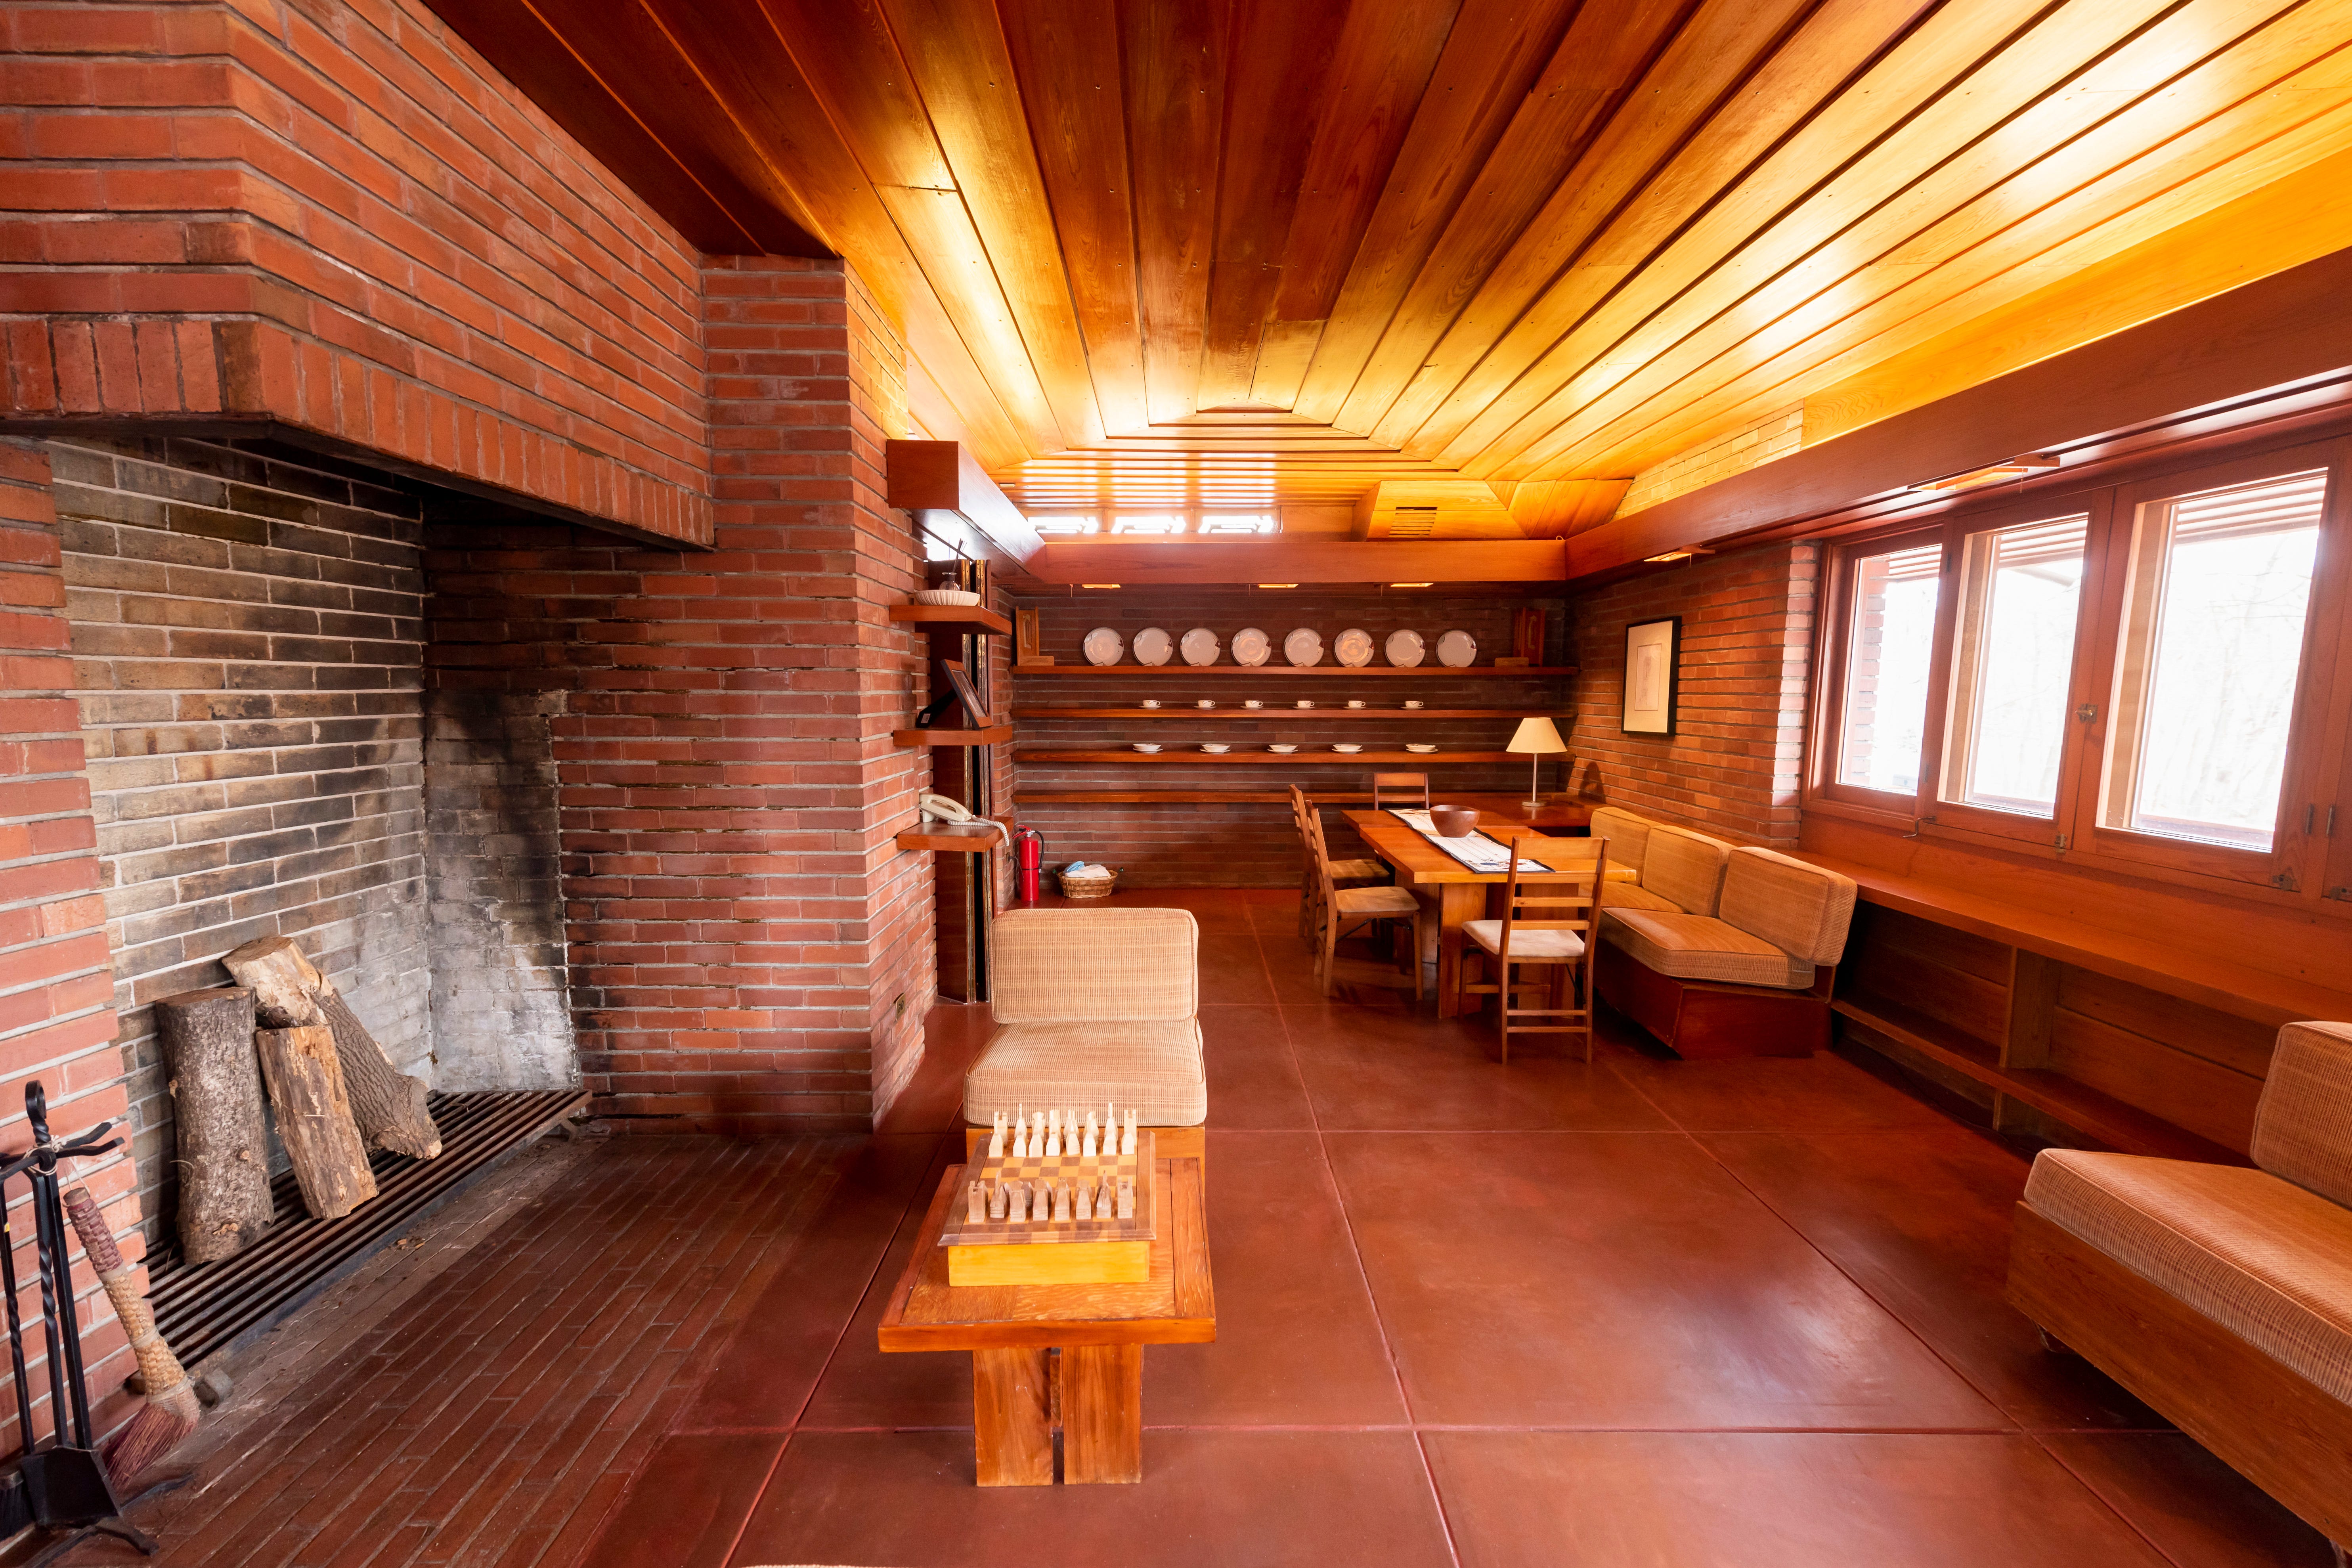 The main living area included a six-foot-high fireplace designed to hold tall logs vertically.